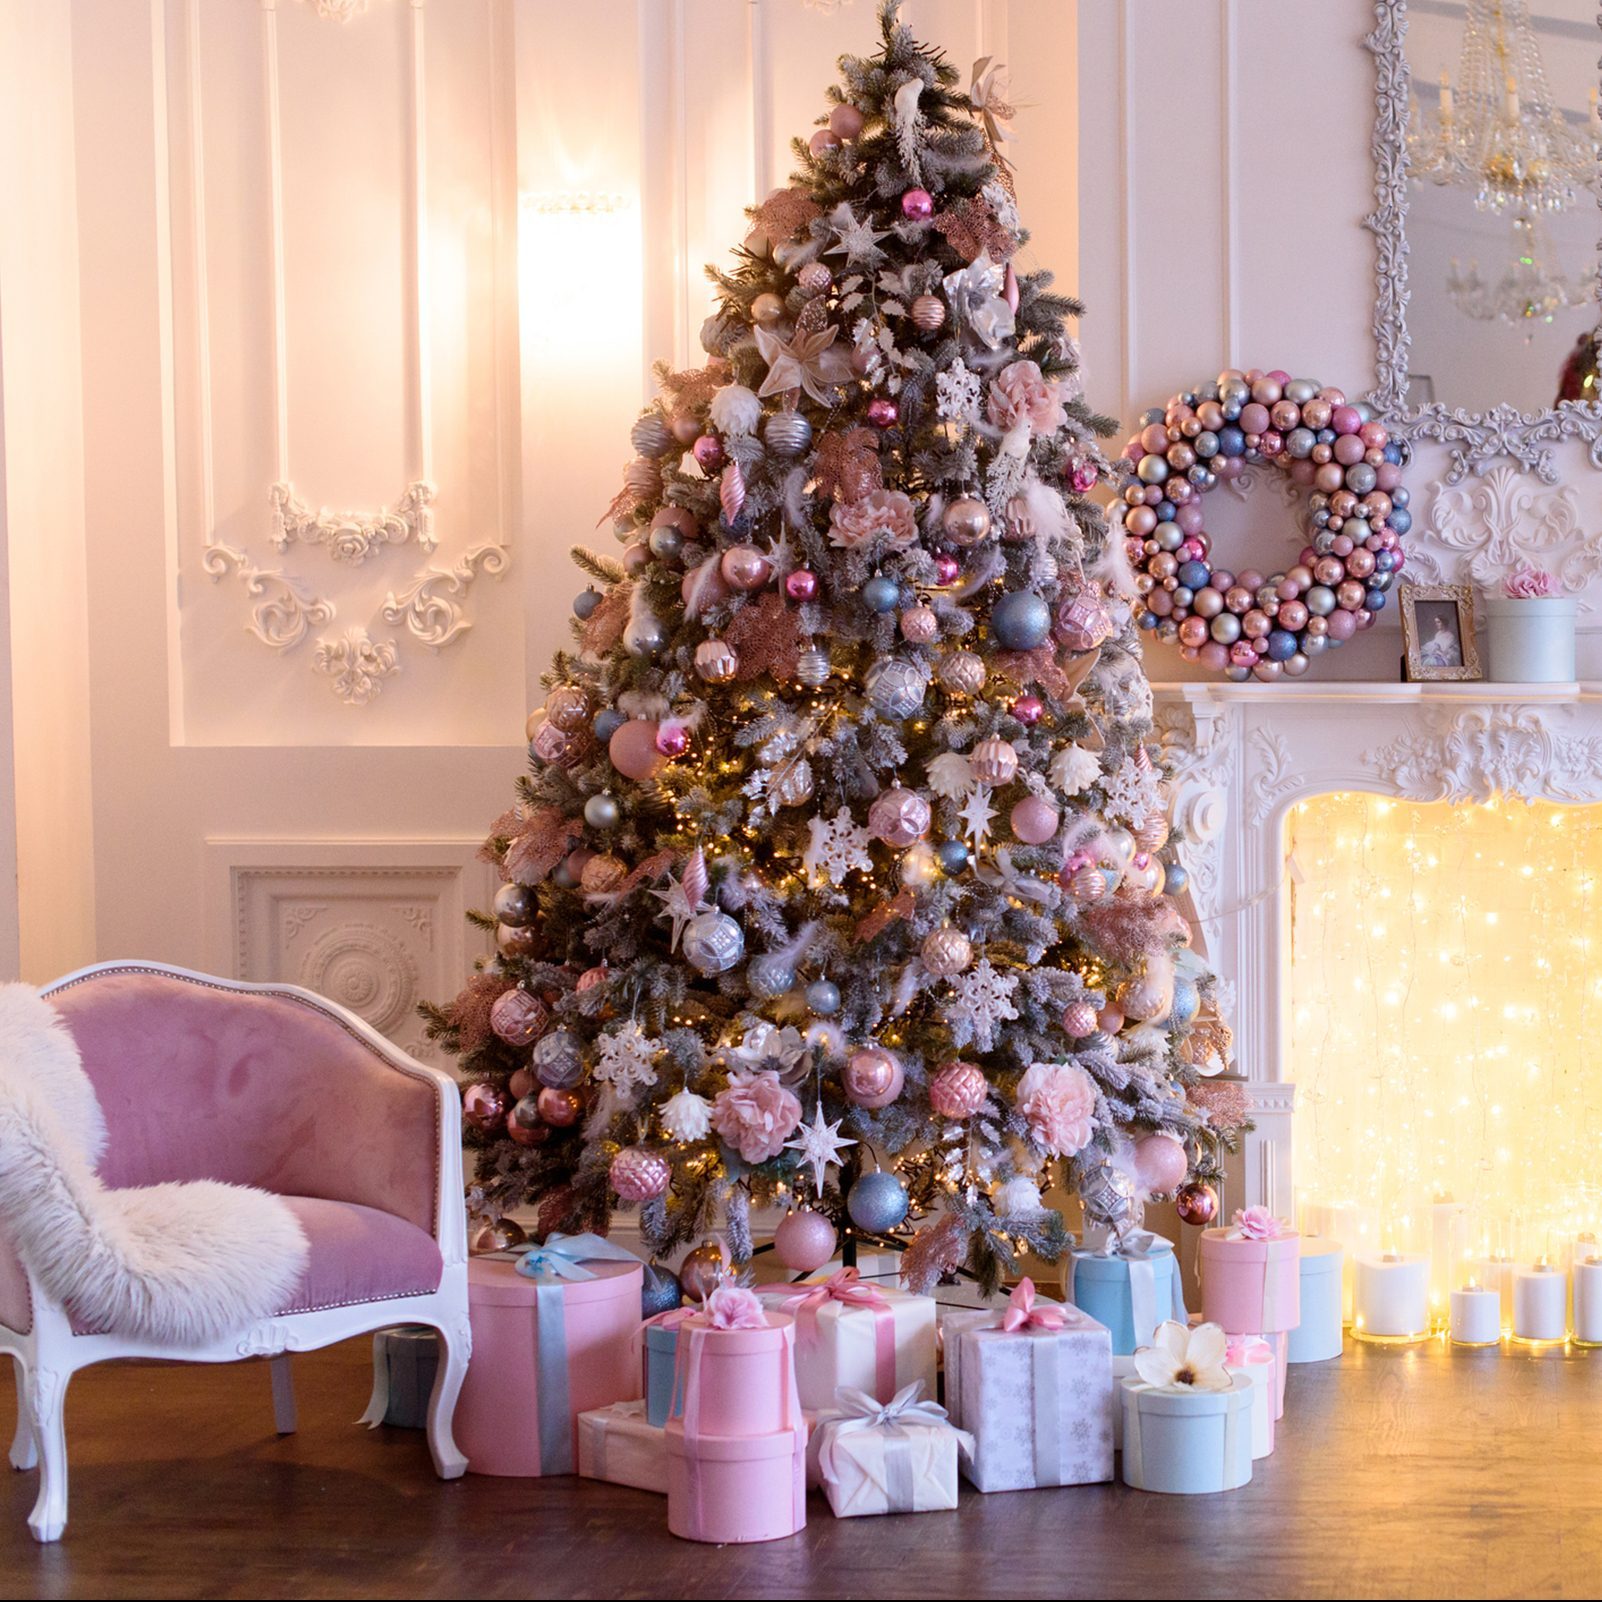 Christmas living room interior with a big Christmas tree, gifts and a vintage armchair